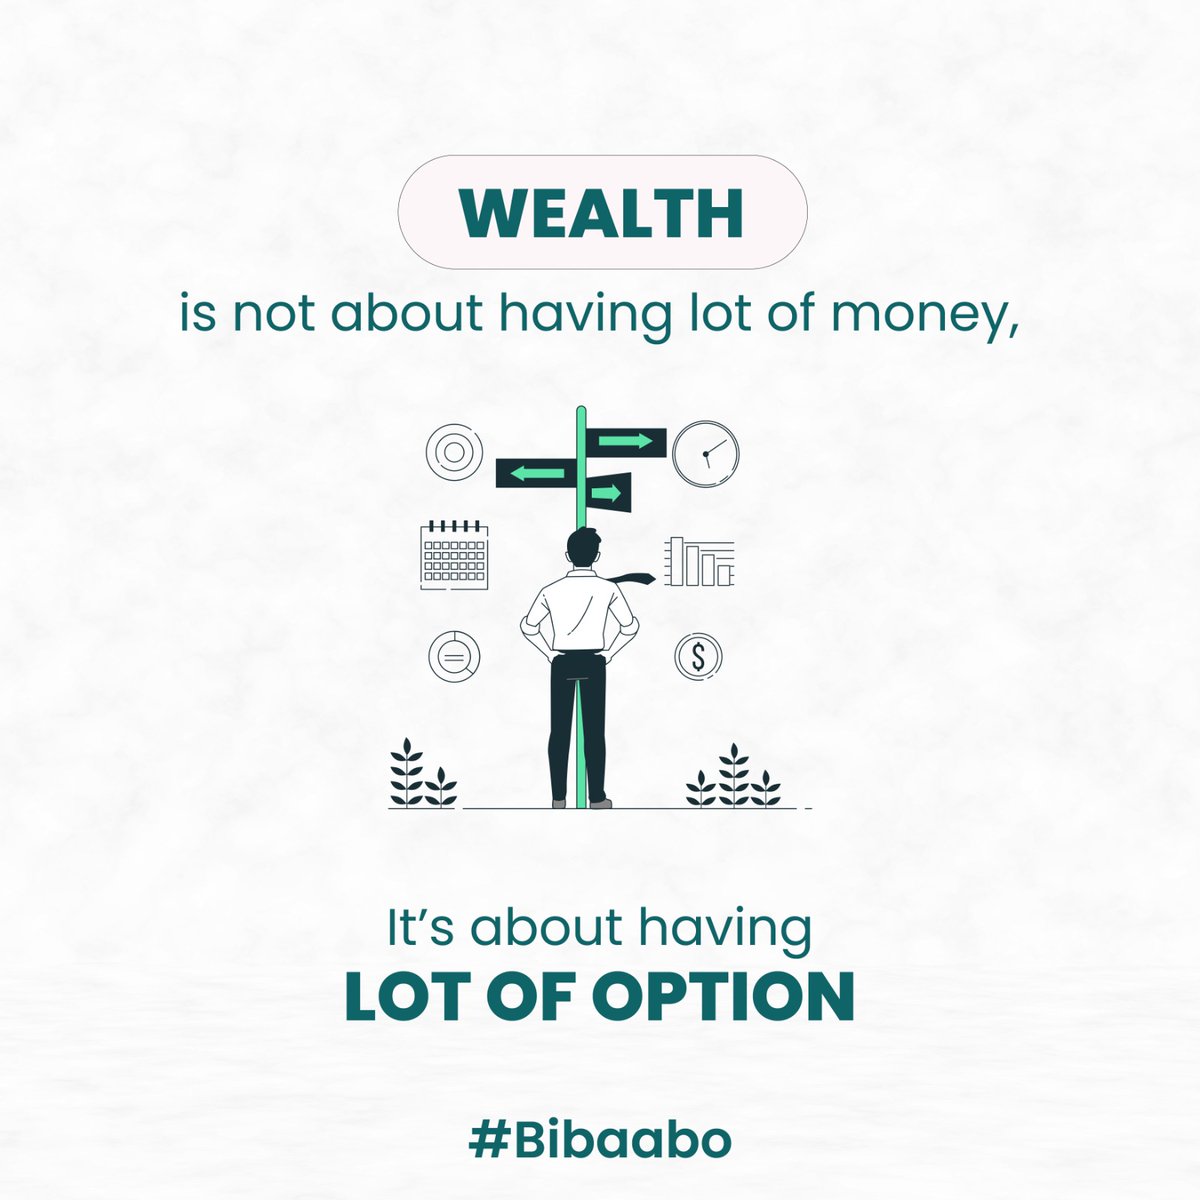 True wealth is not just about having a lot of money, it's about having a lot of options. It's about having the ability to choose what you want to do and when you want to do it. 🌍👨‍👩‍👧‍👦 

#Bibaabonepal #Bibaabo #FinancialFreedom #MoneyGoals #LifeOptions #InvestingForTheFuture